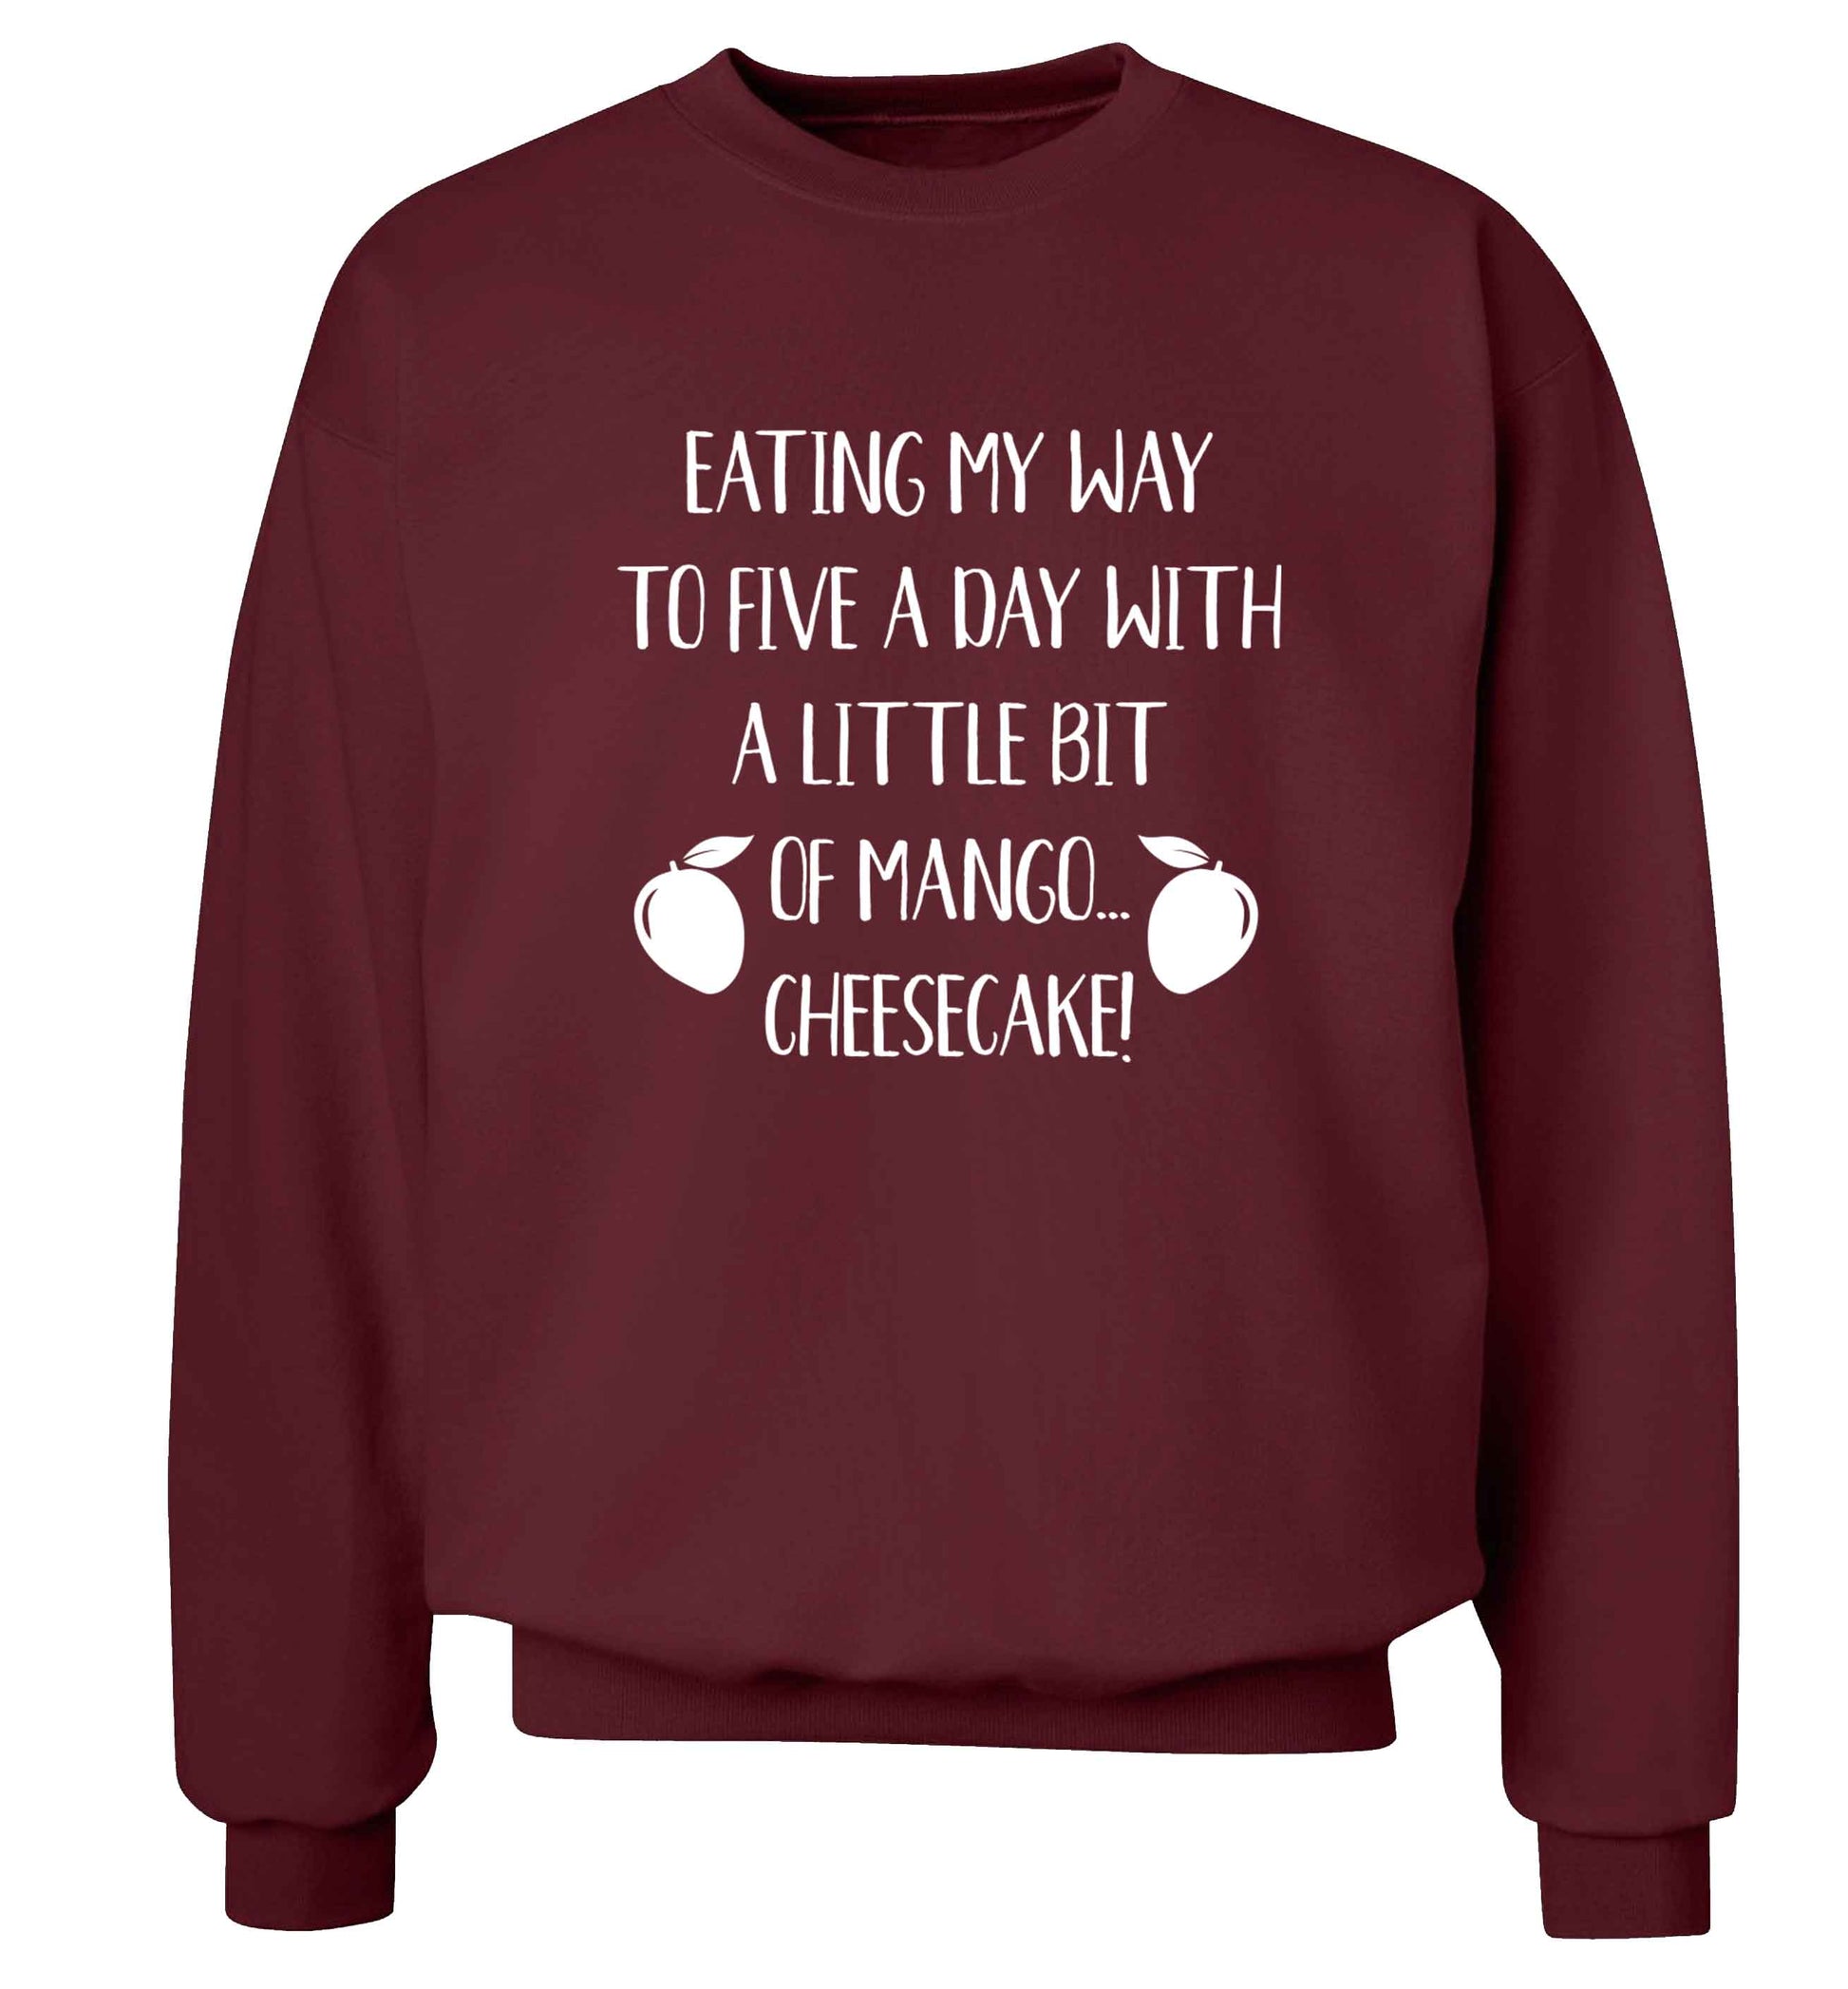 Eating my way to five a day with a little bit of mango cheesecake Adult's unisex maroon Sweater 2XL